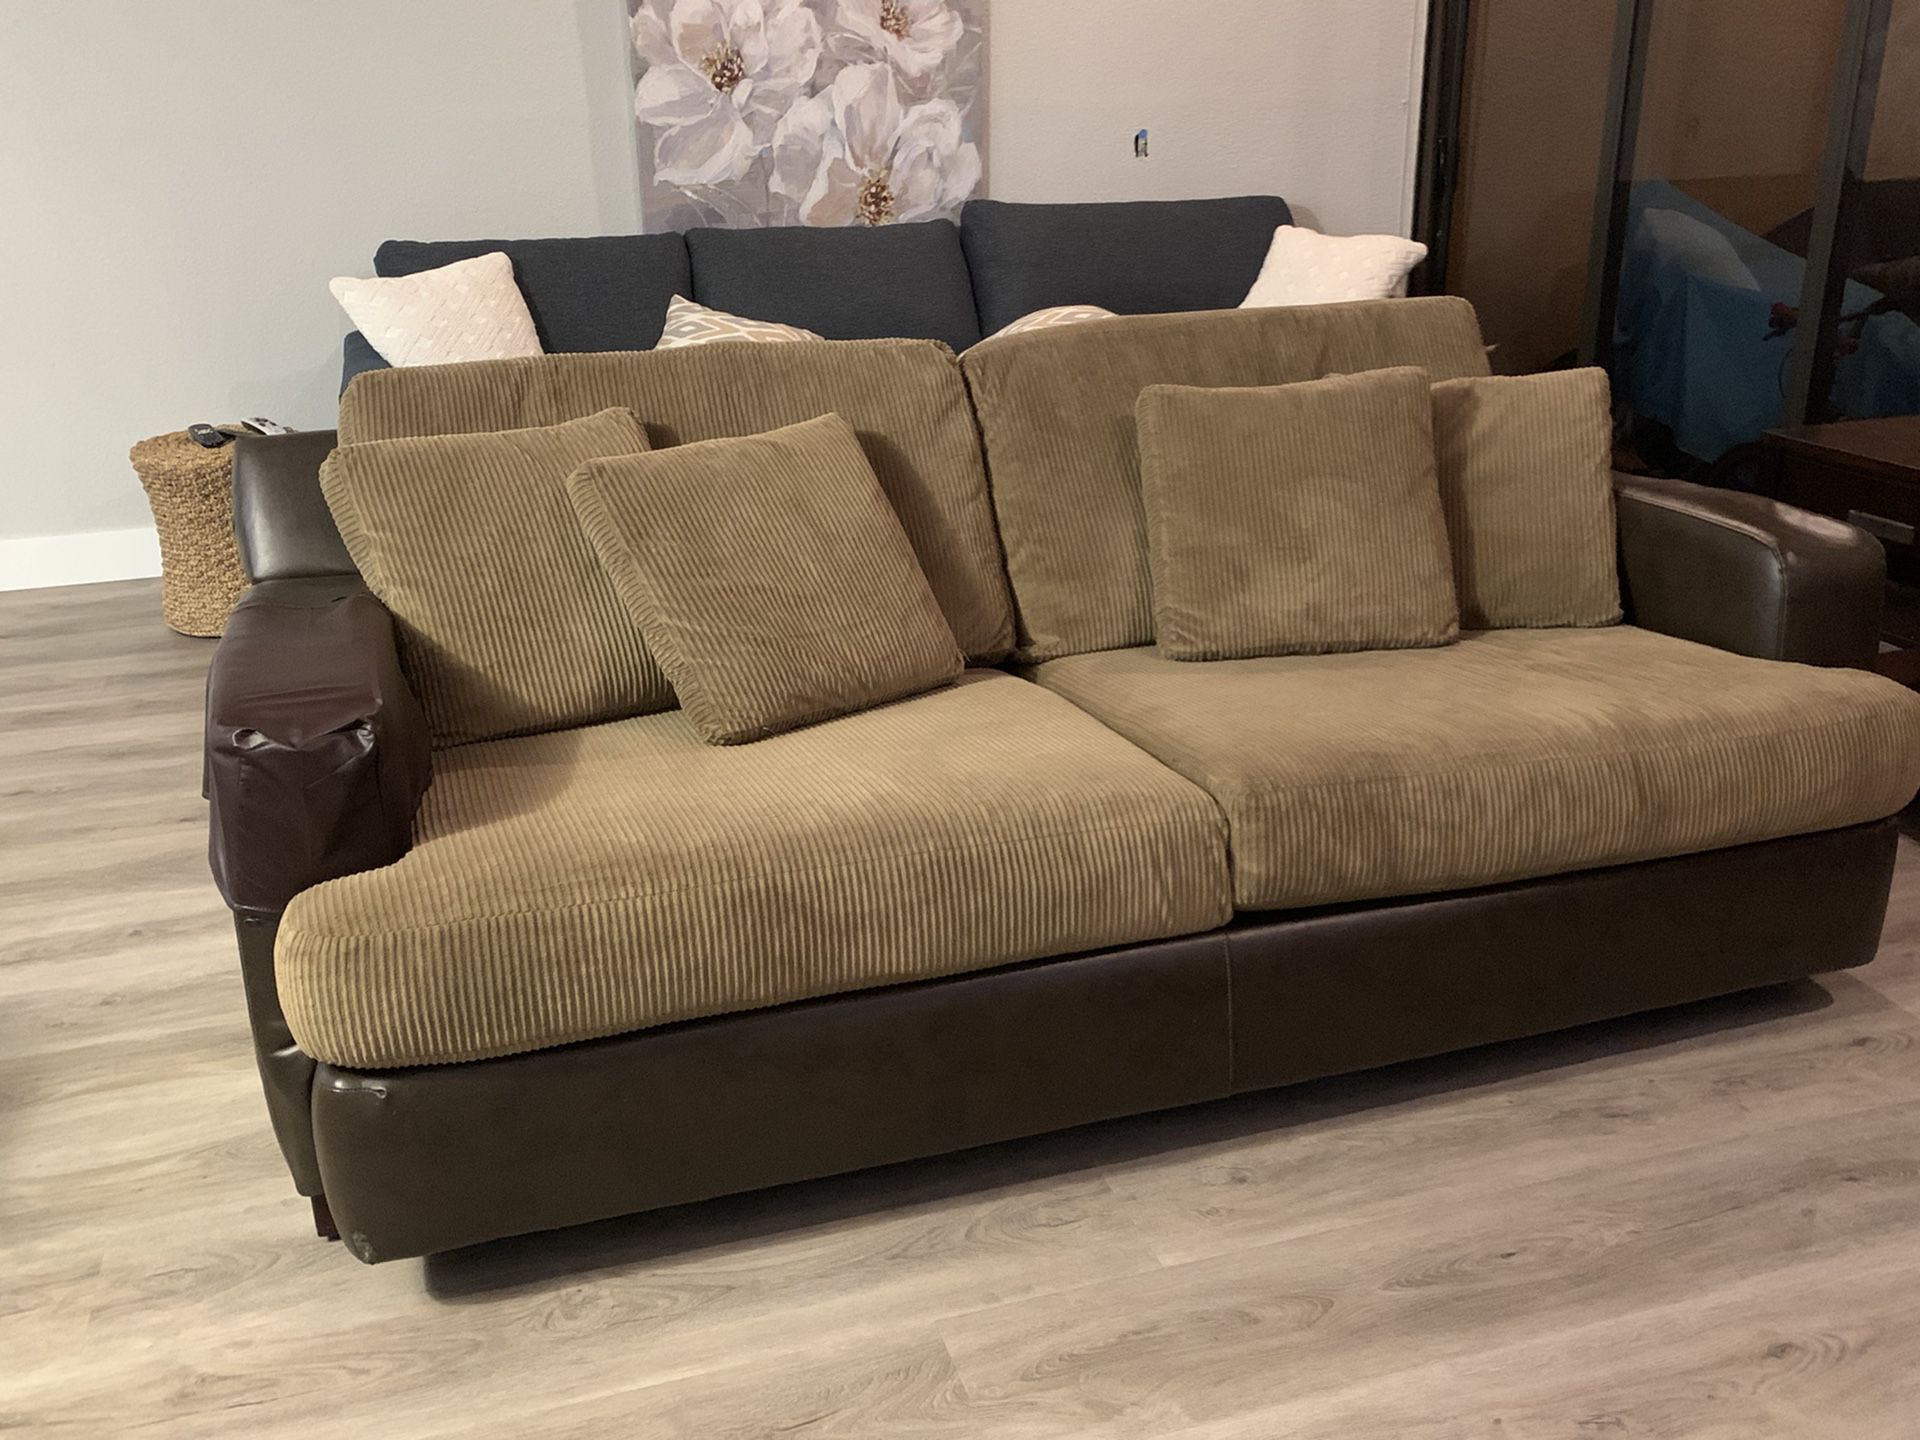 FREE the most comfortable Sofa EVER